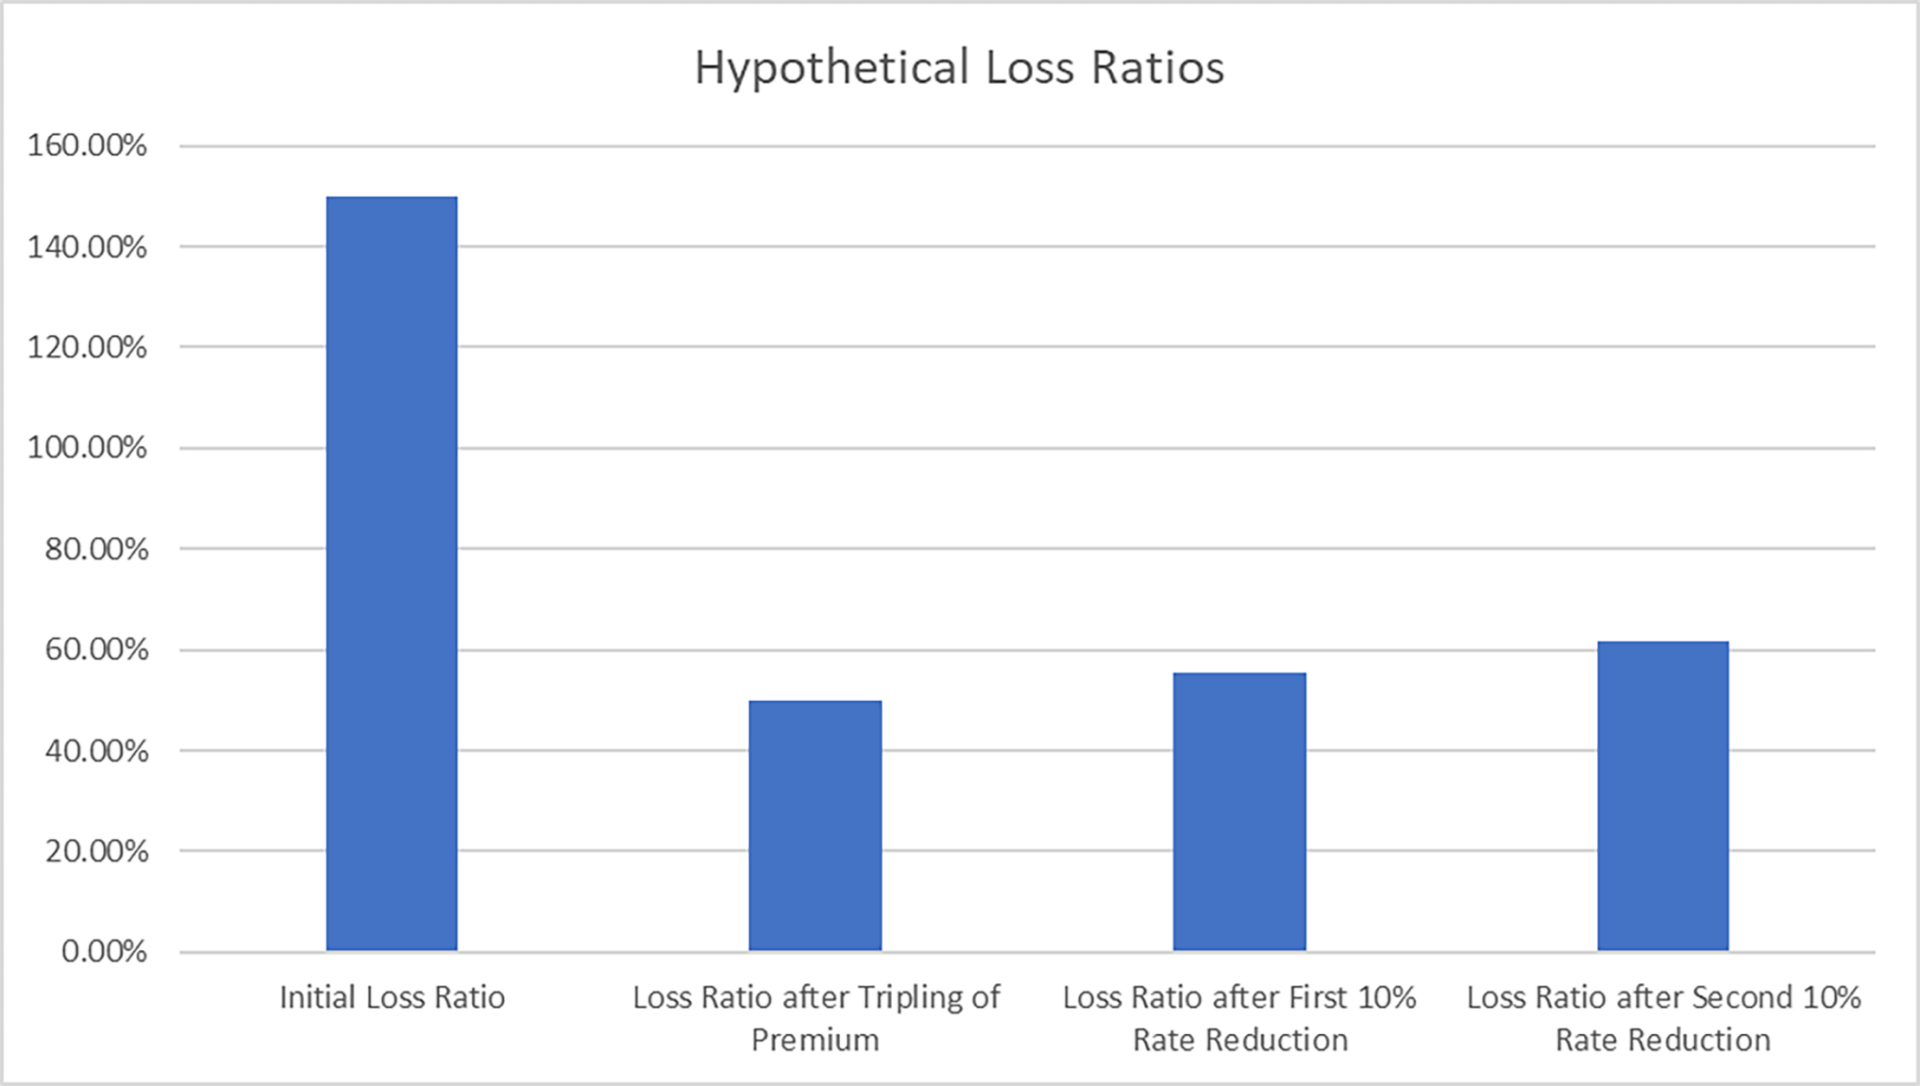 Impact of rate change on a hypothetical insurer.